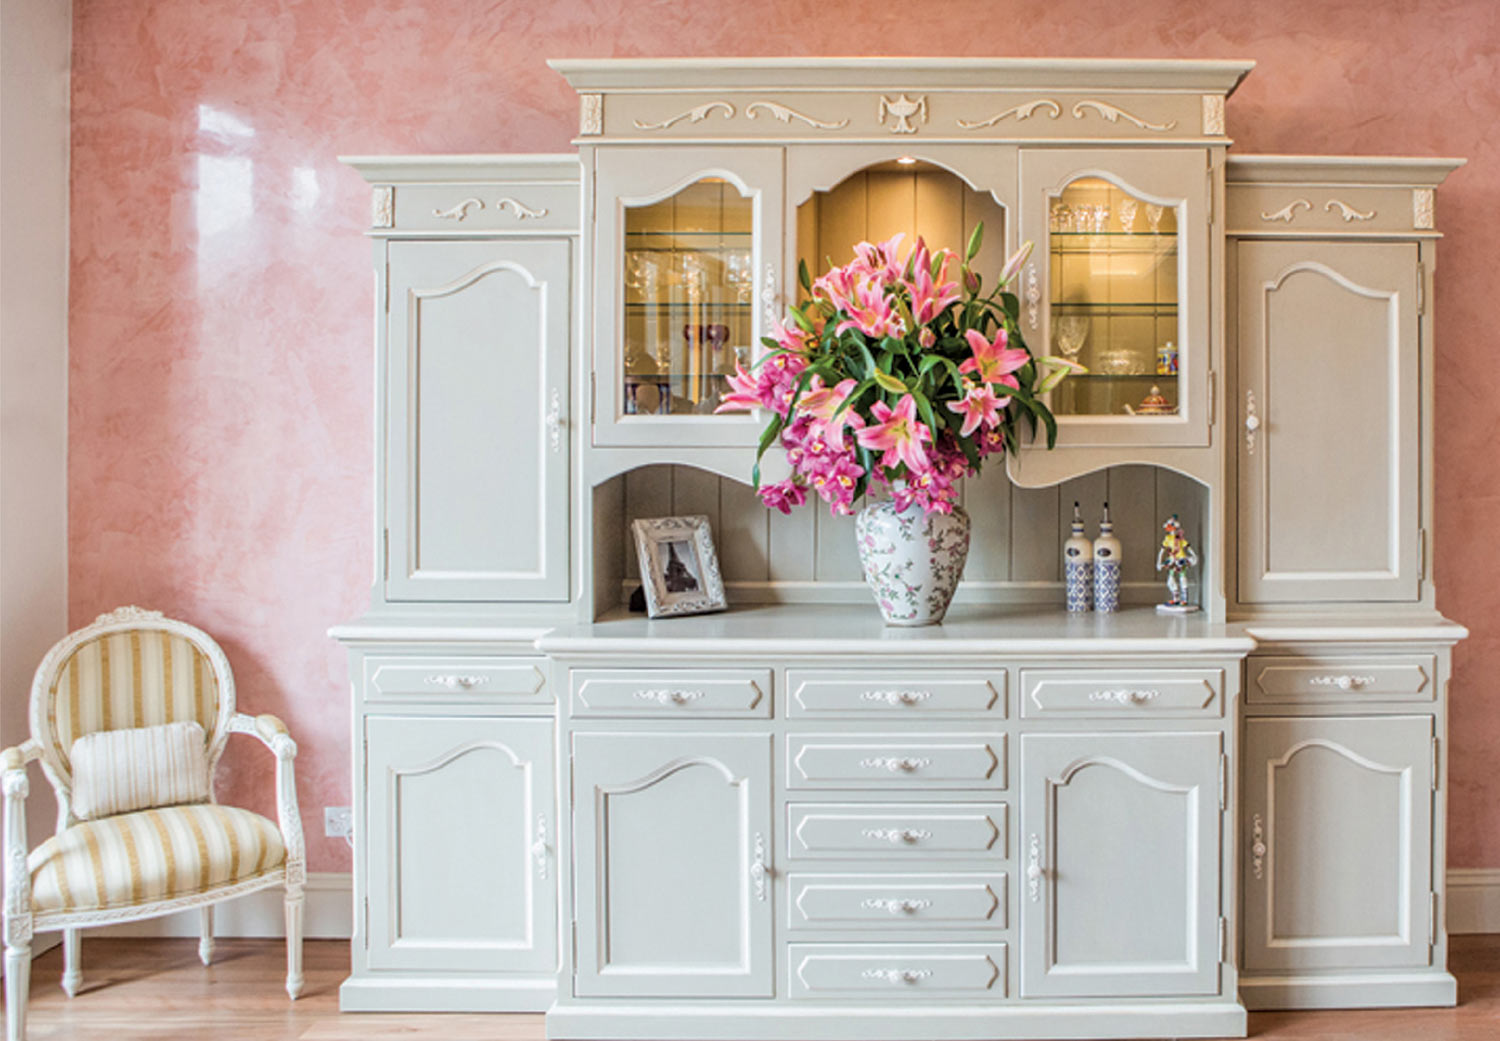 1 French buffet design custom made and custom finish with french chair and décor